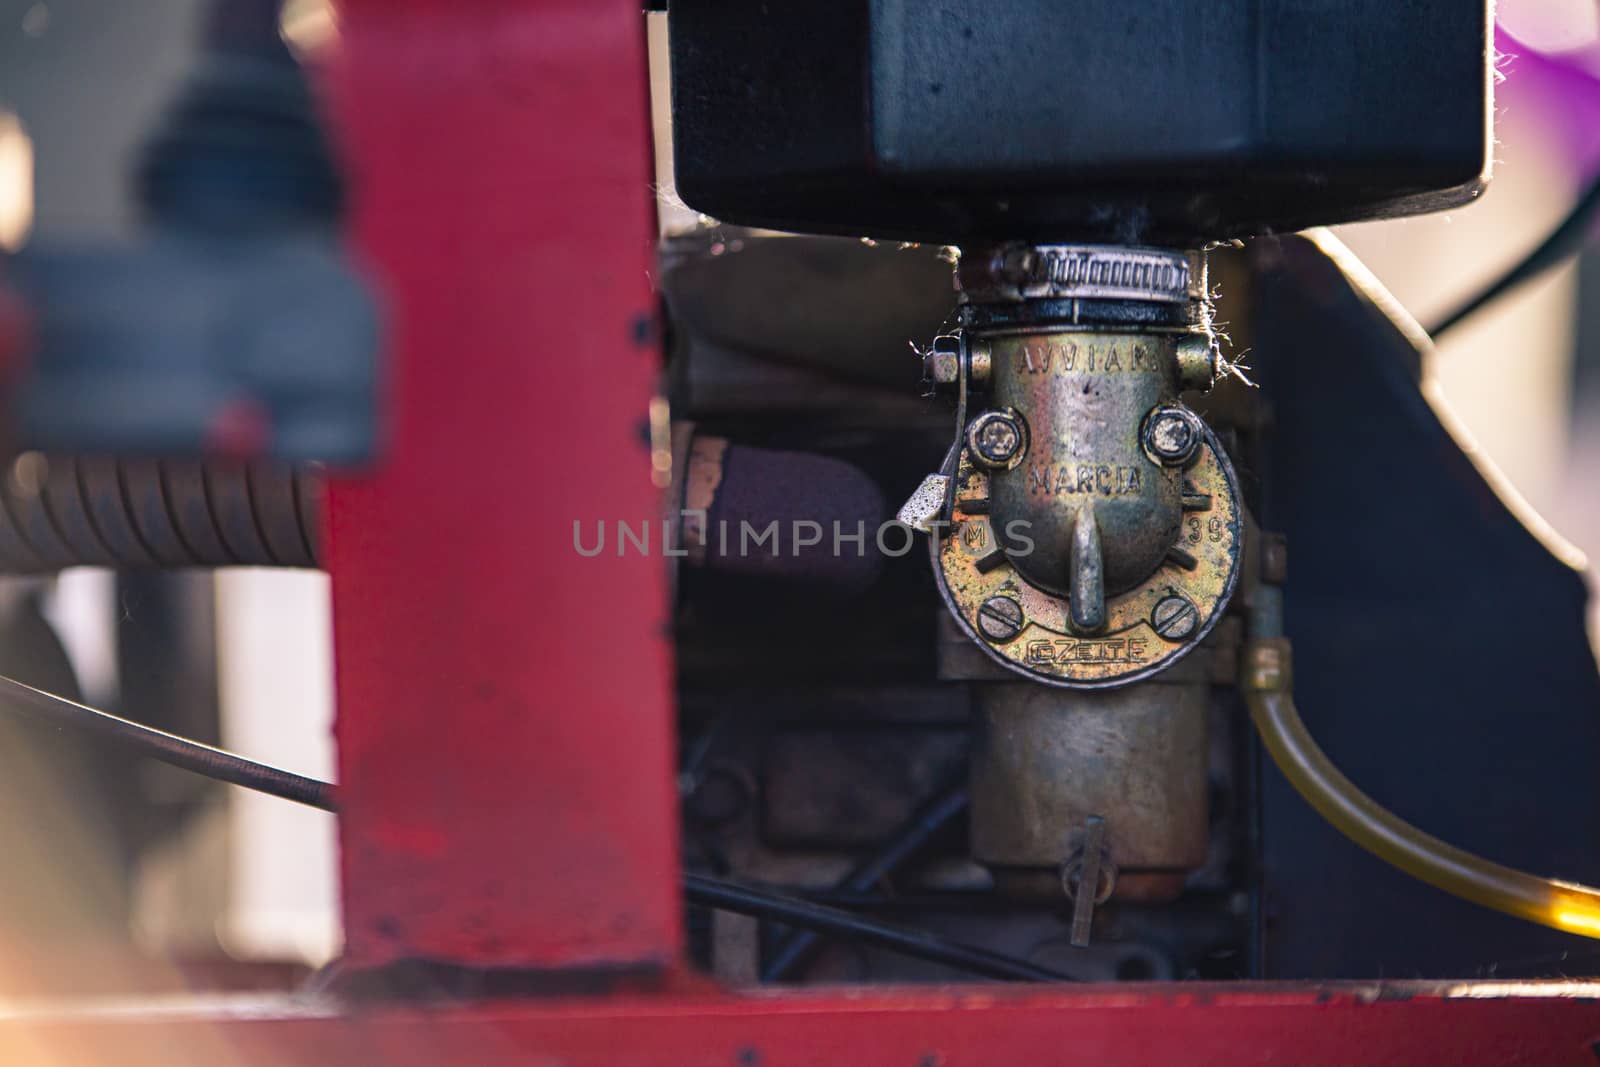 Old internal combustion engine 3 by pippocarlot